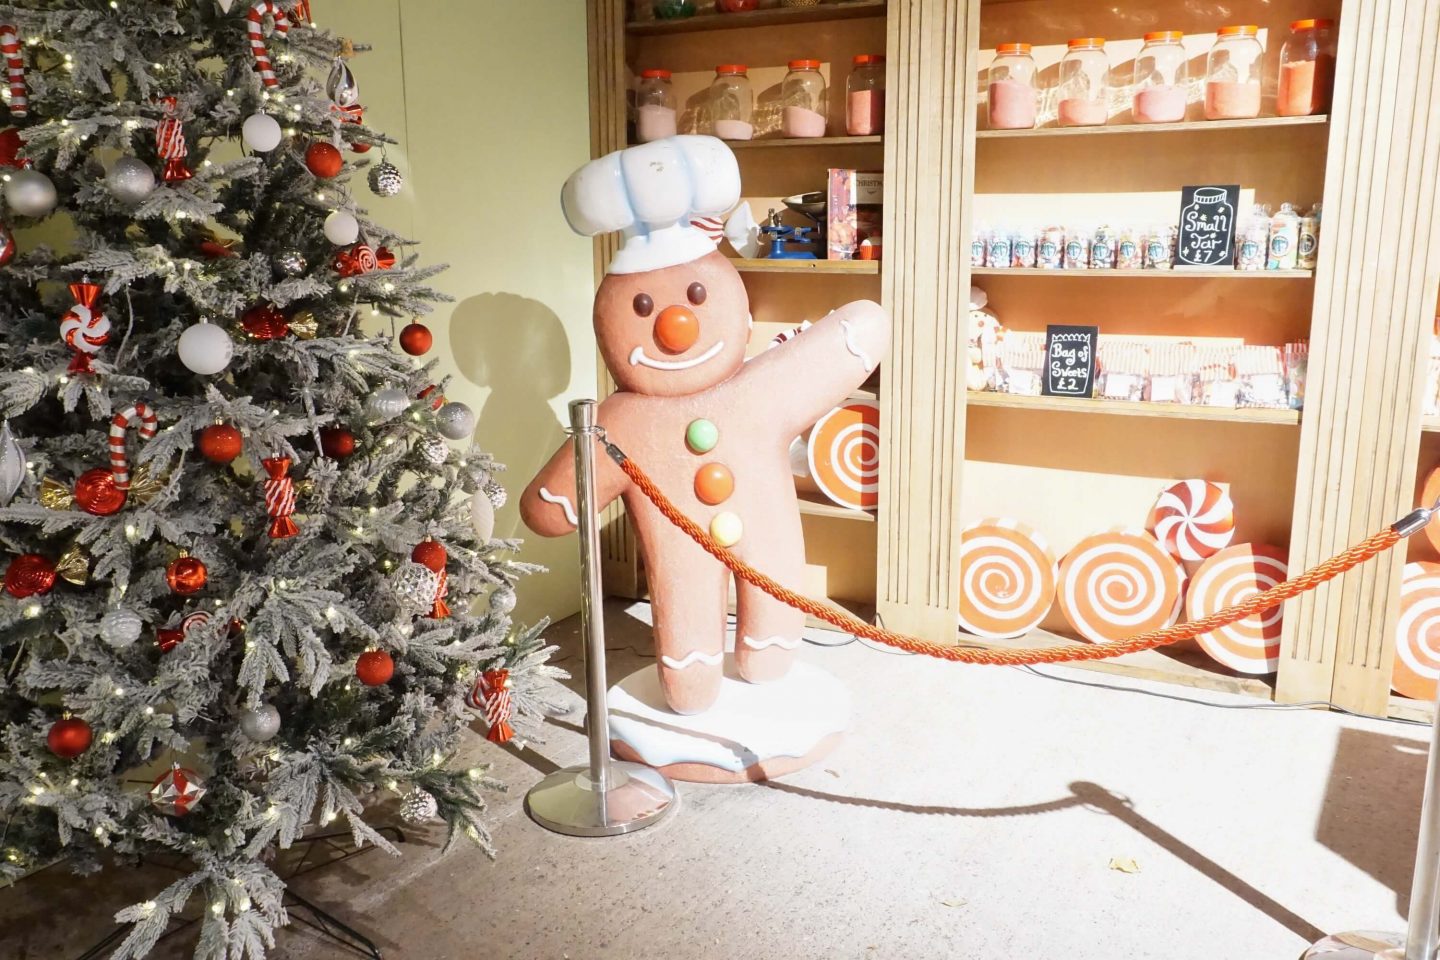 Giant gingerbread man beside sweets for sale in the cookie decorating area of Santa Experience at Winter Glow